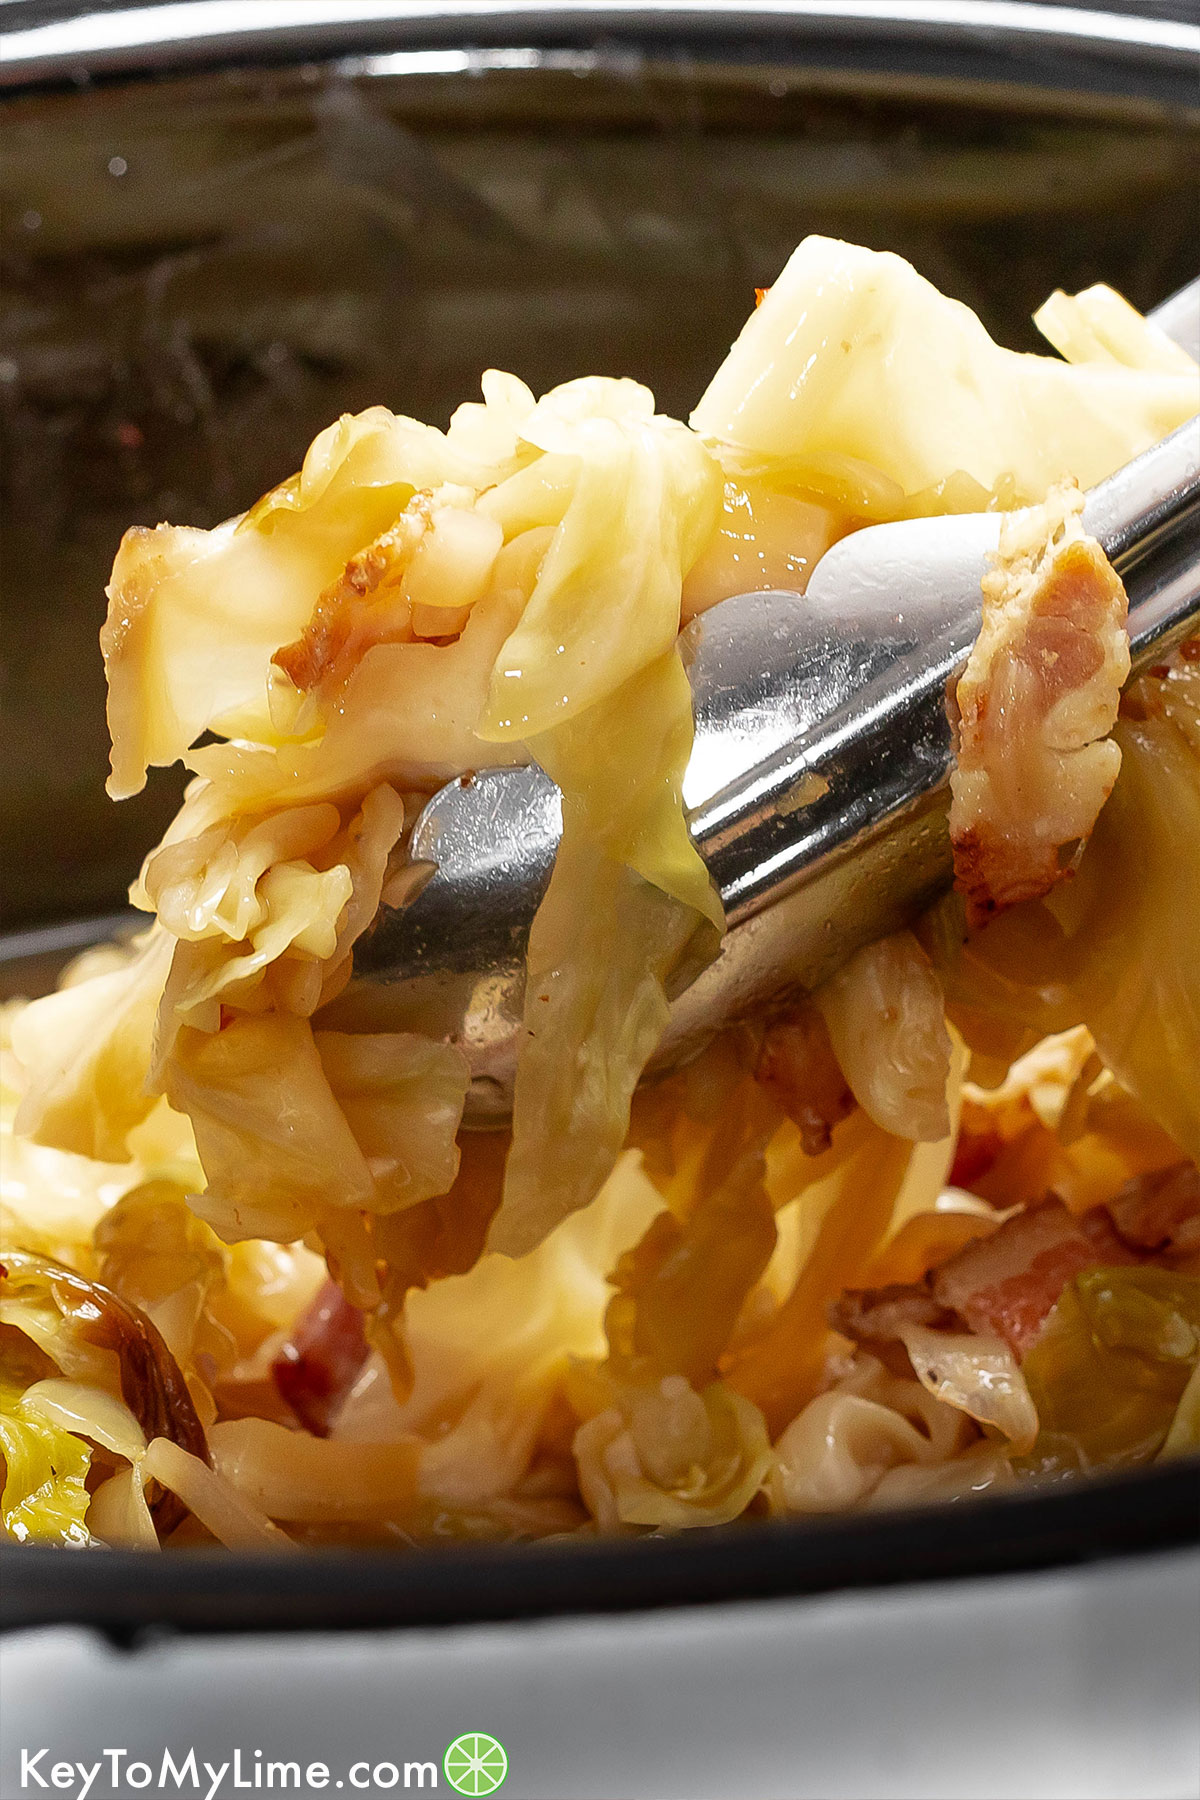 Tongs lifting out of a crockpot with a scoop of cabbage and bacon.